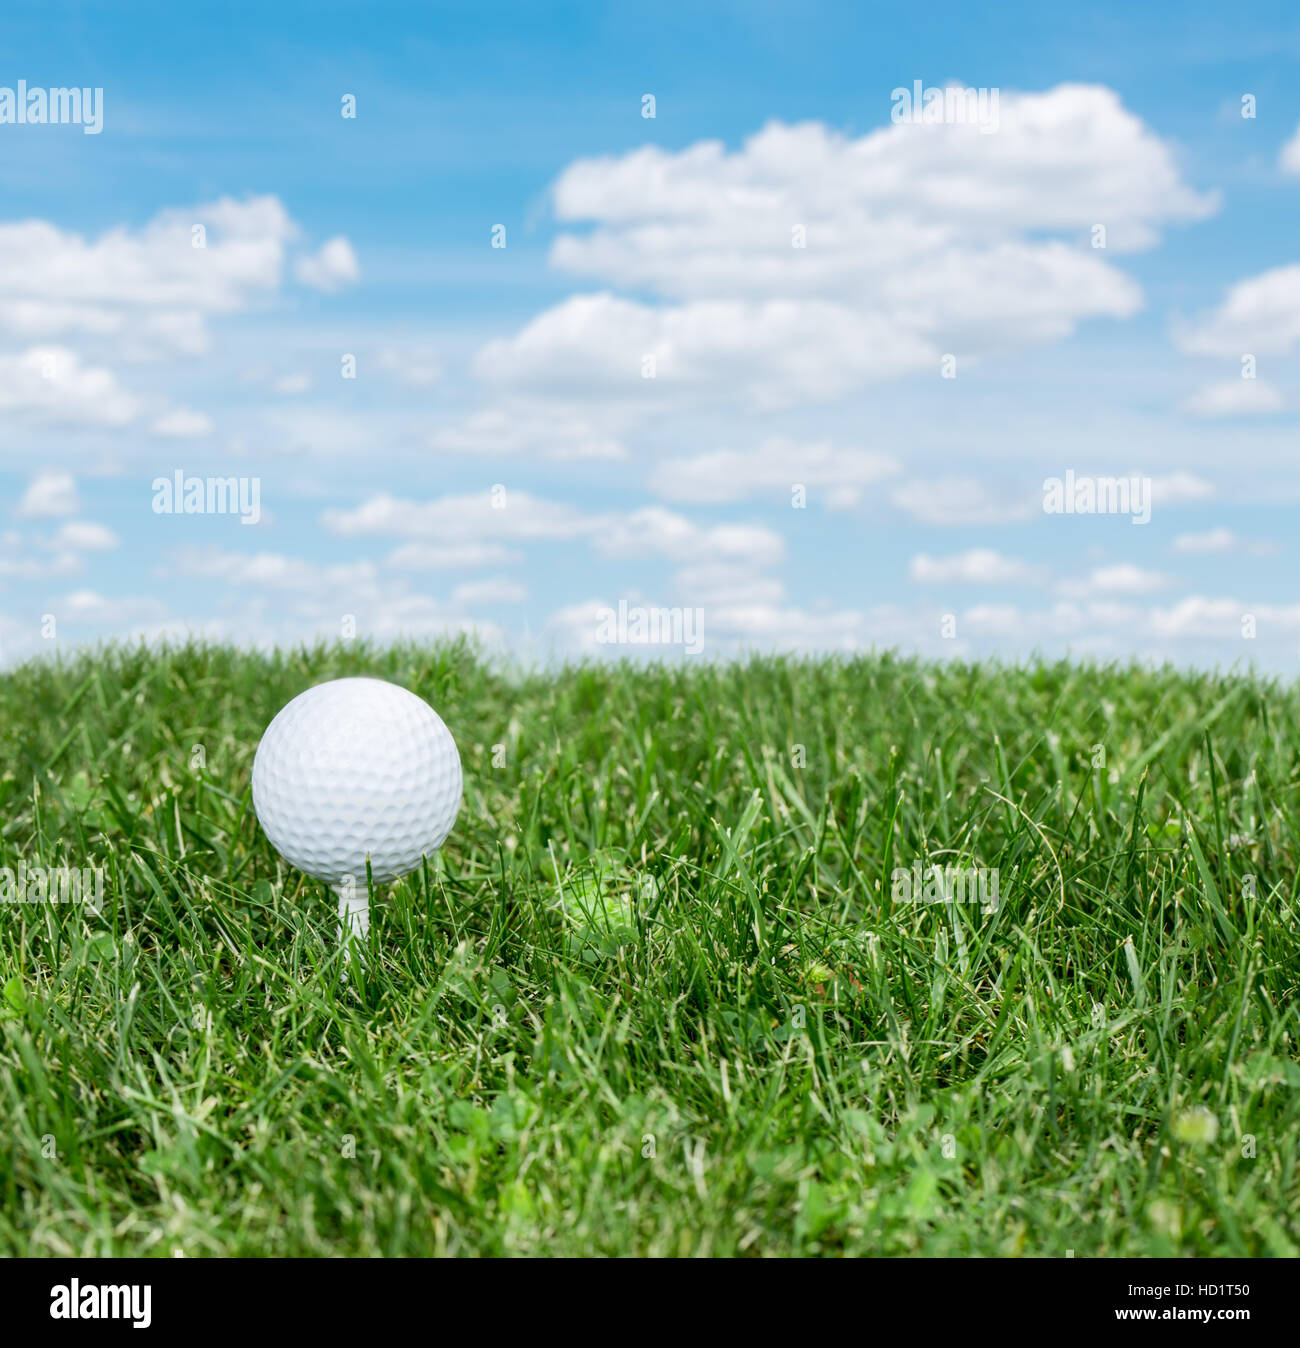 Golf ball ready to be hit on the green grass. Stock Photo